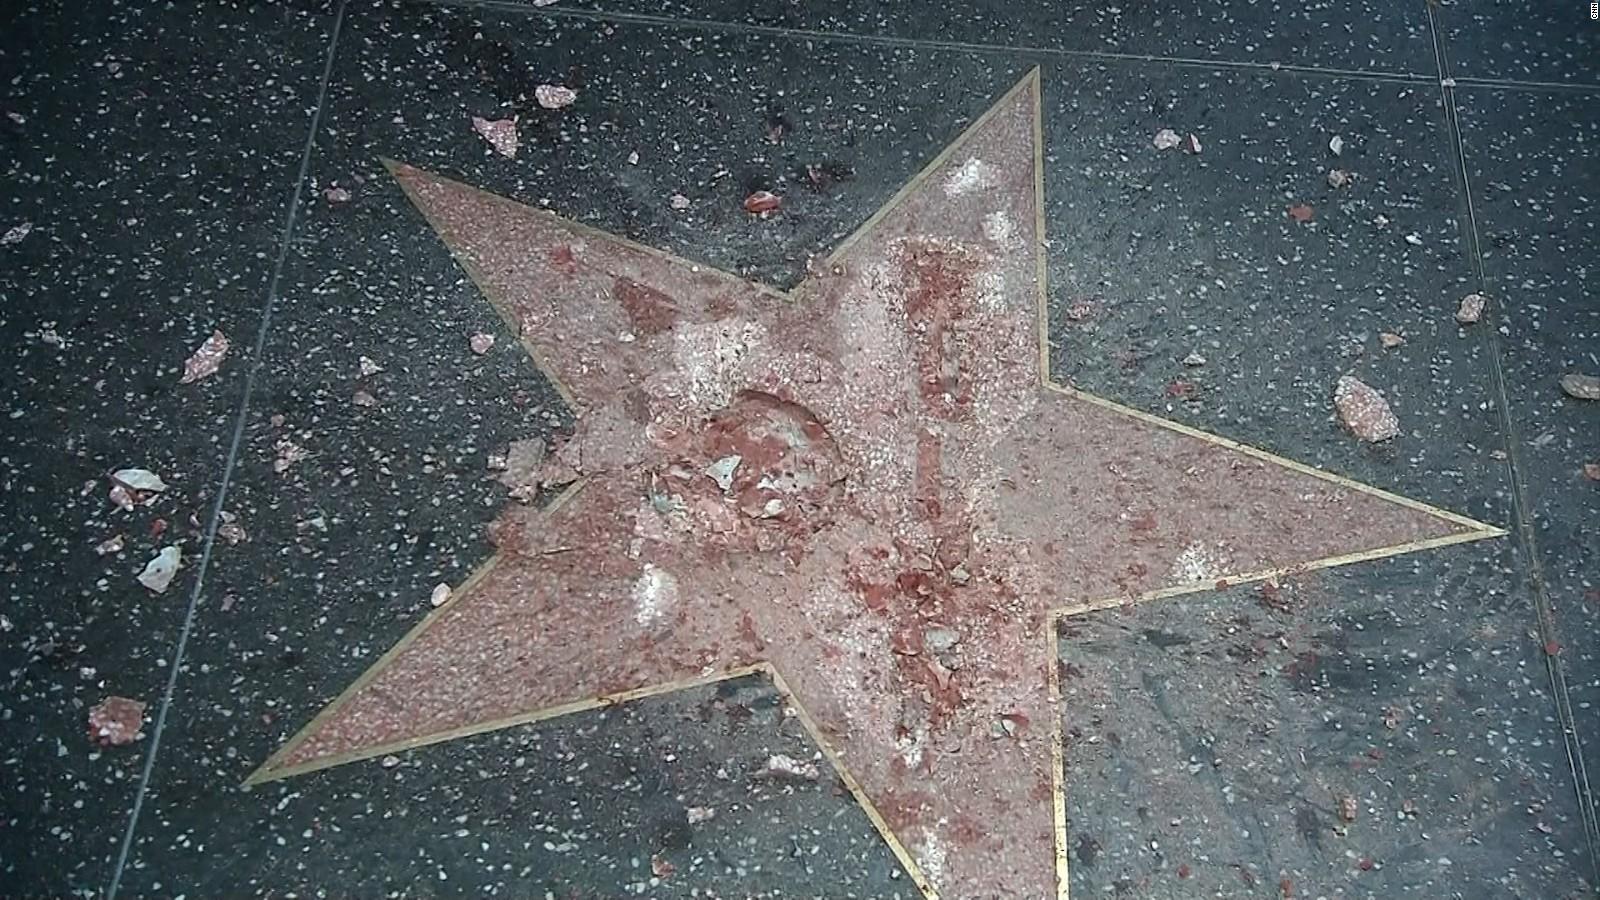 Donald Trump's Hollywood star destroyed